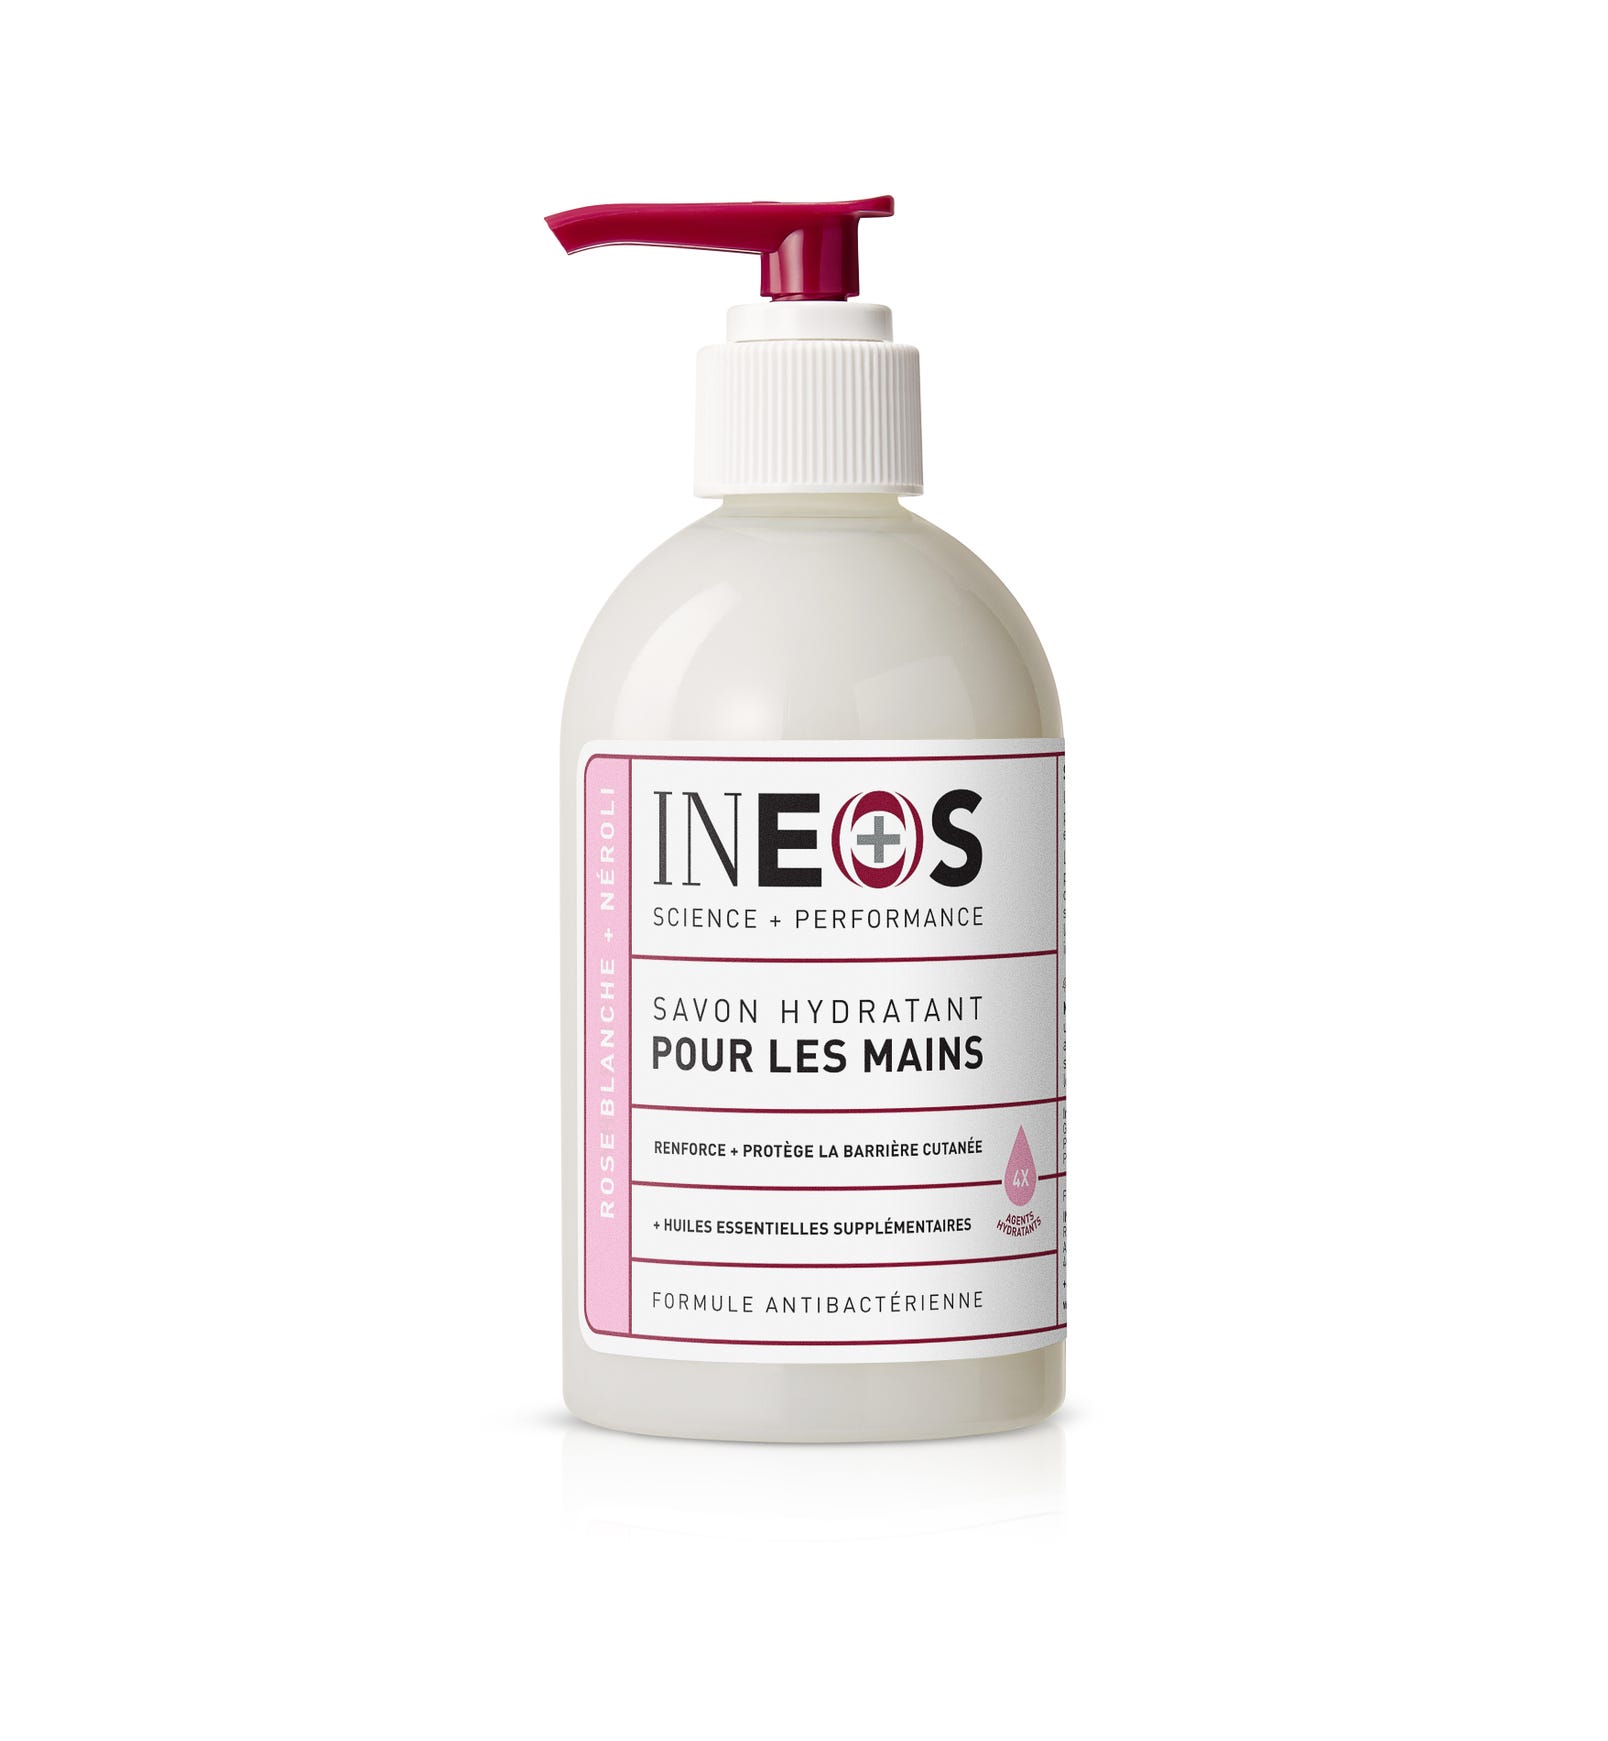 a photo of the french ineos hygienics moisturising hand wash on a white background